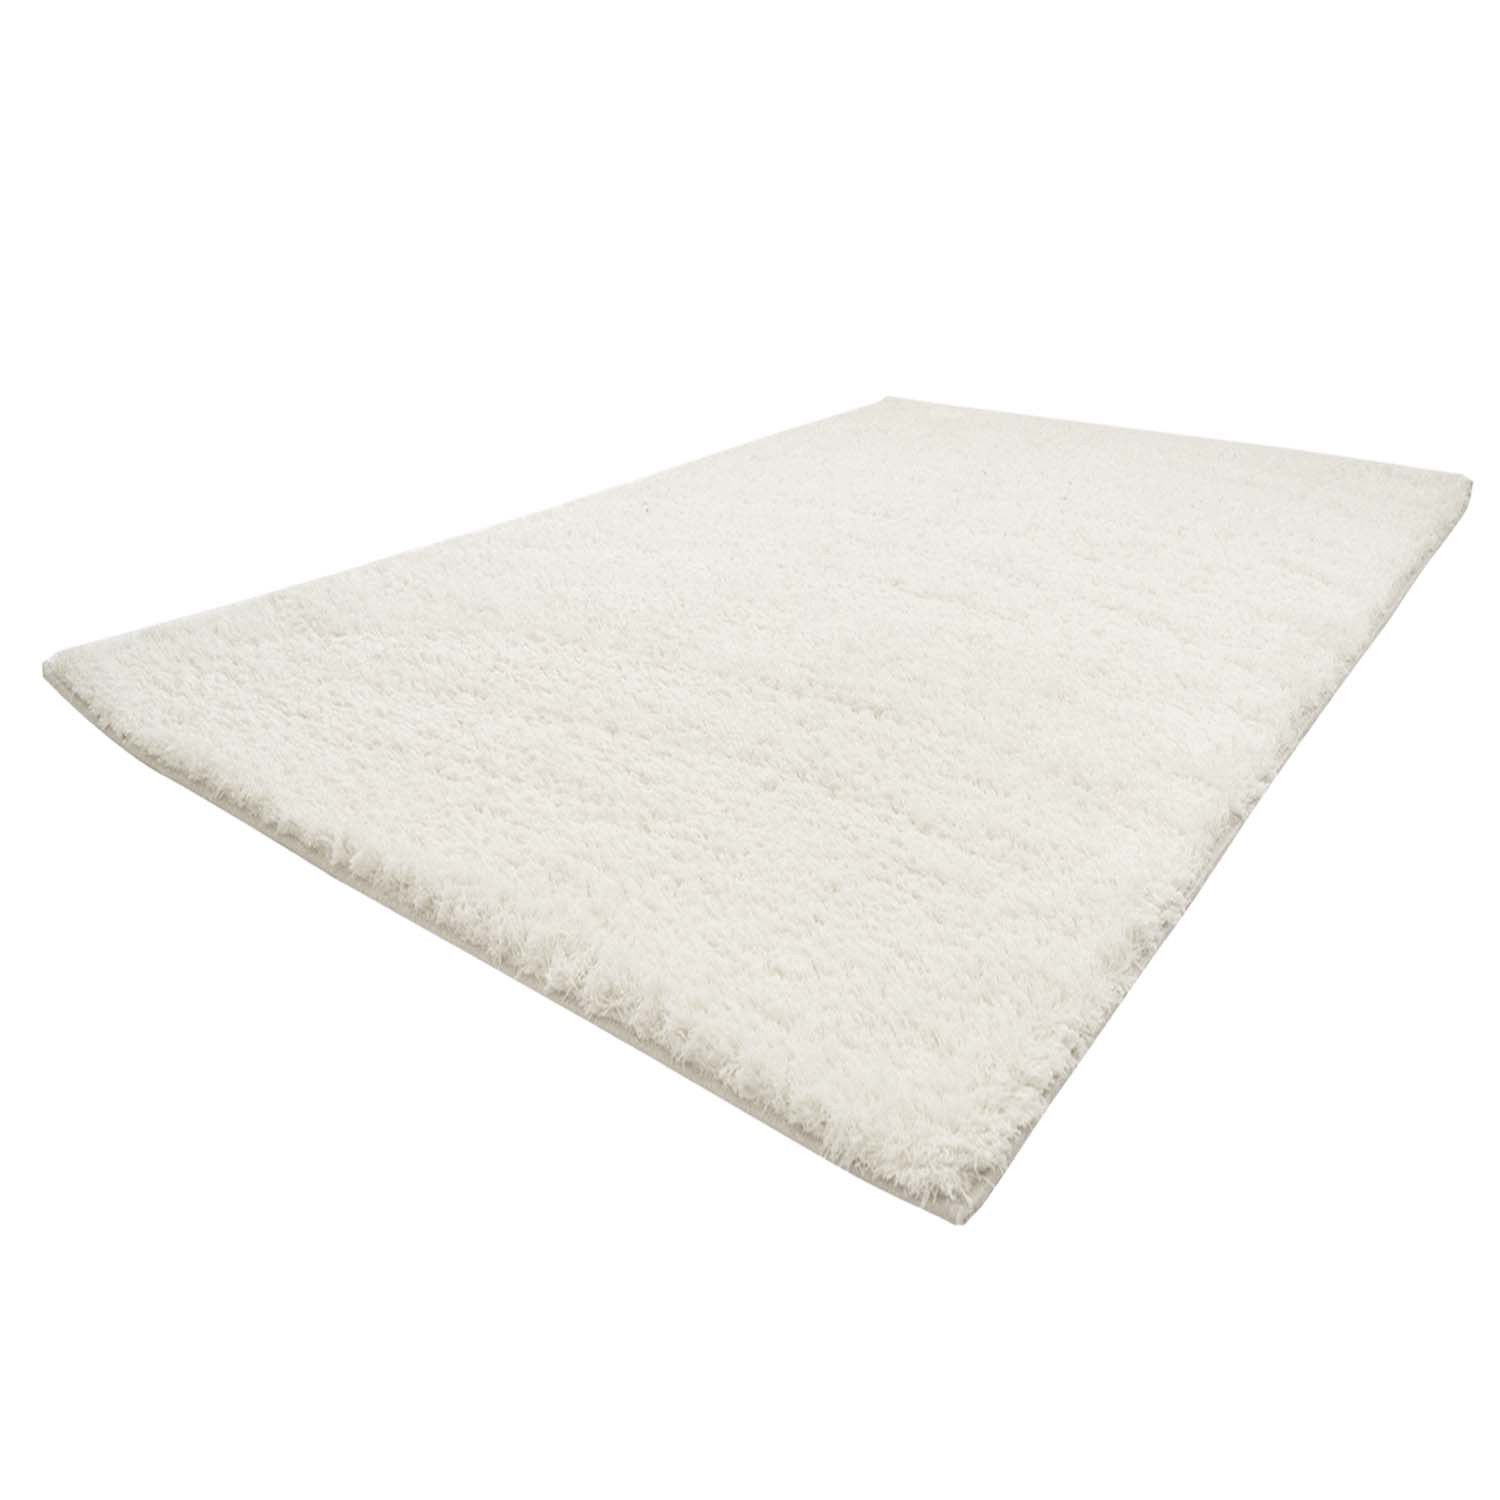 Buy Carpets And Rugs Online I Best Carpets Online I Rugs Store Uk I  Trendcarpet Intended For White Soft Rugs (Photo 11 of 15)